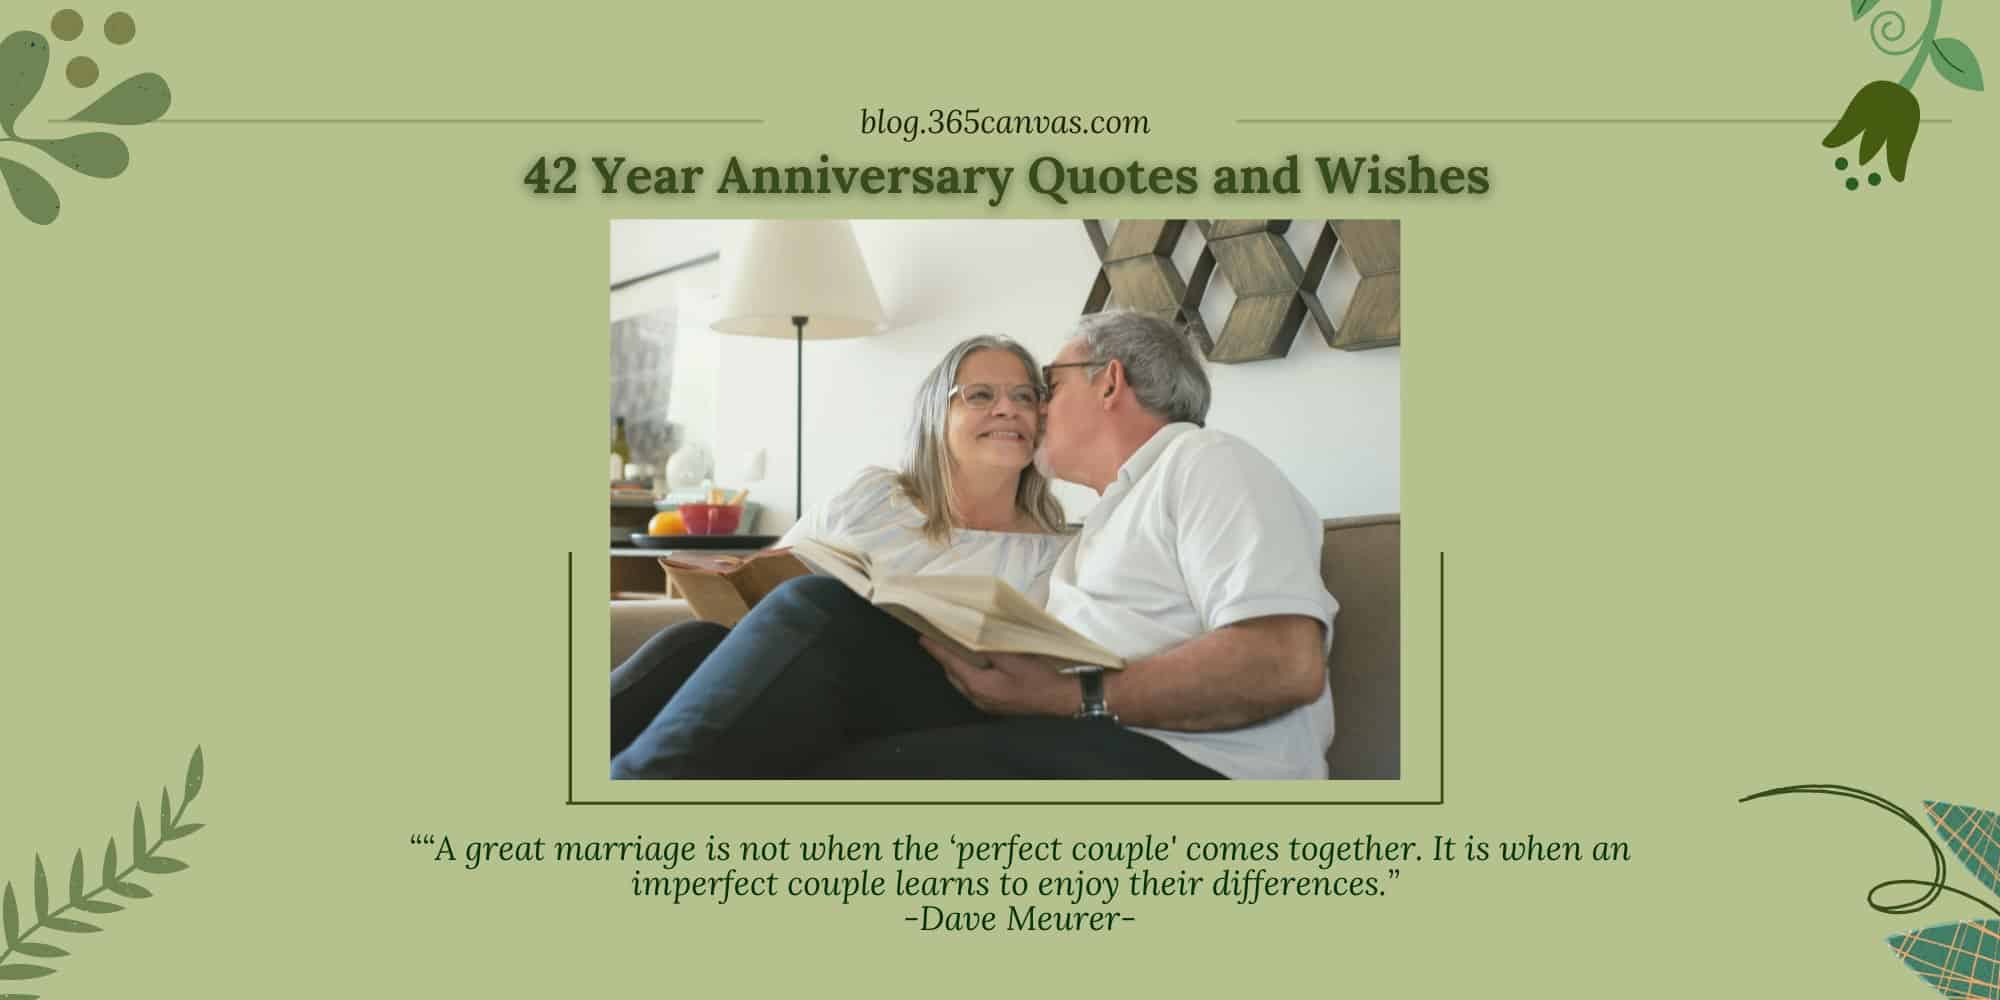 30+ Heartfelt 42nd Year Clock Anniversary Quotes, Wishes and Messages